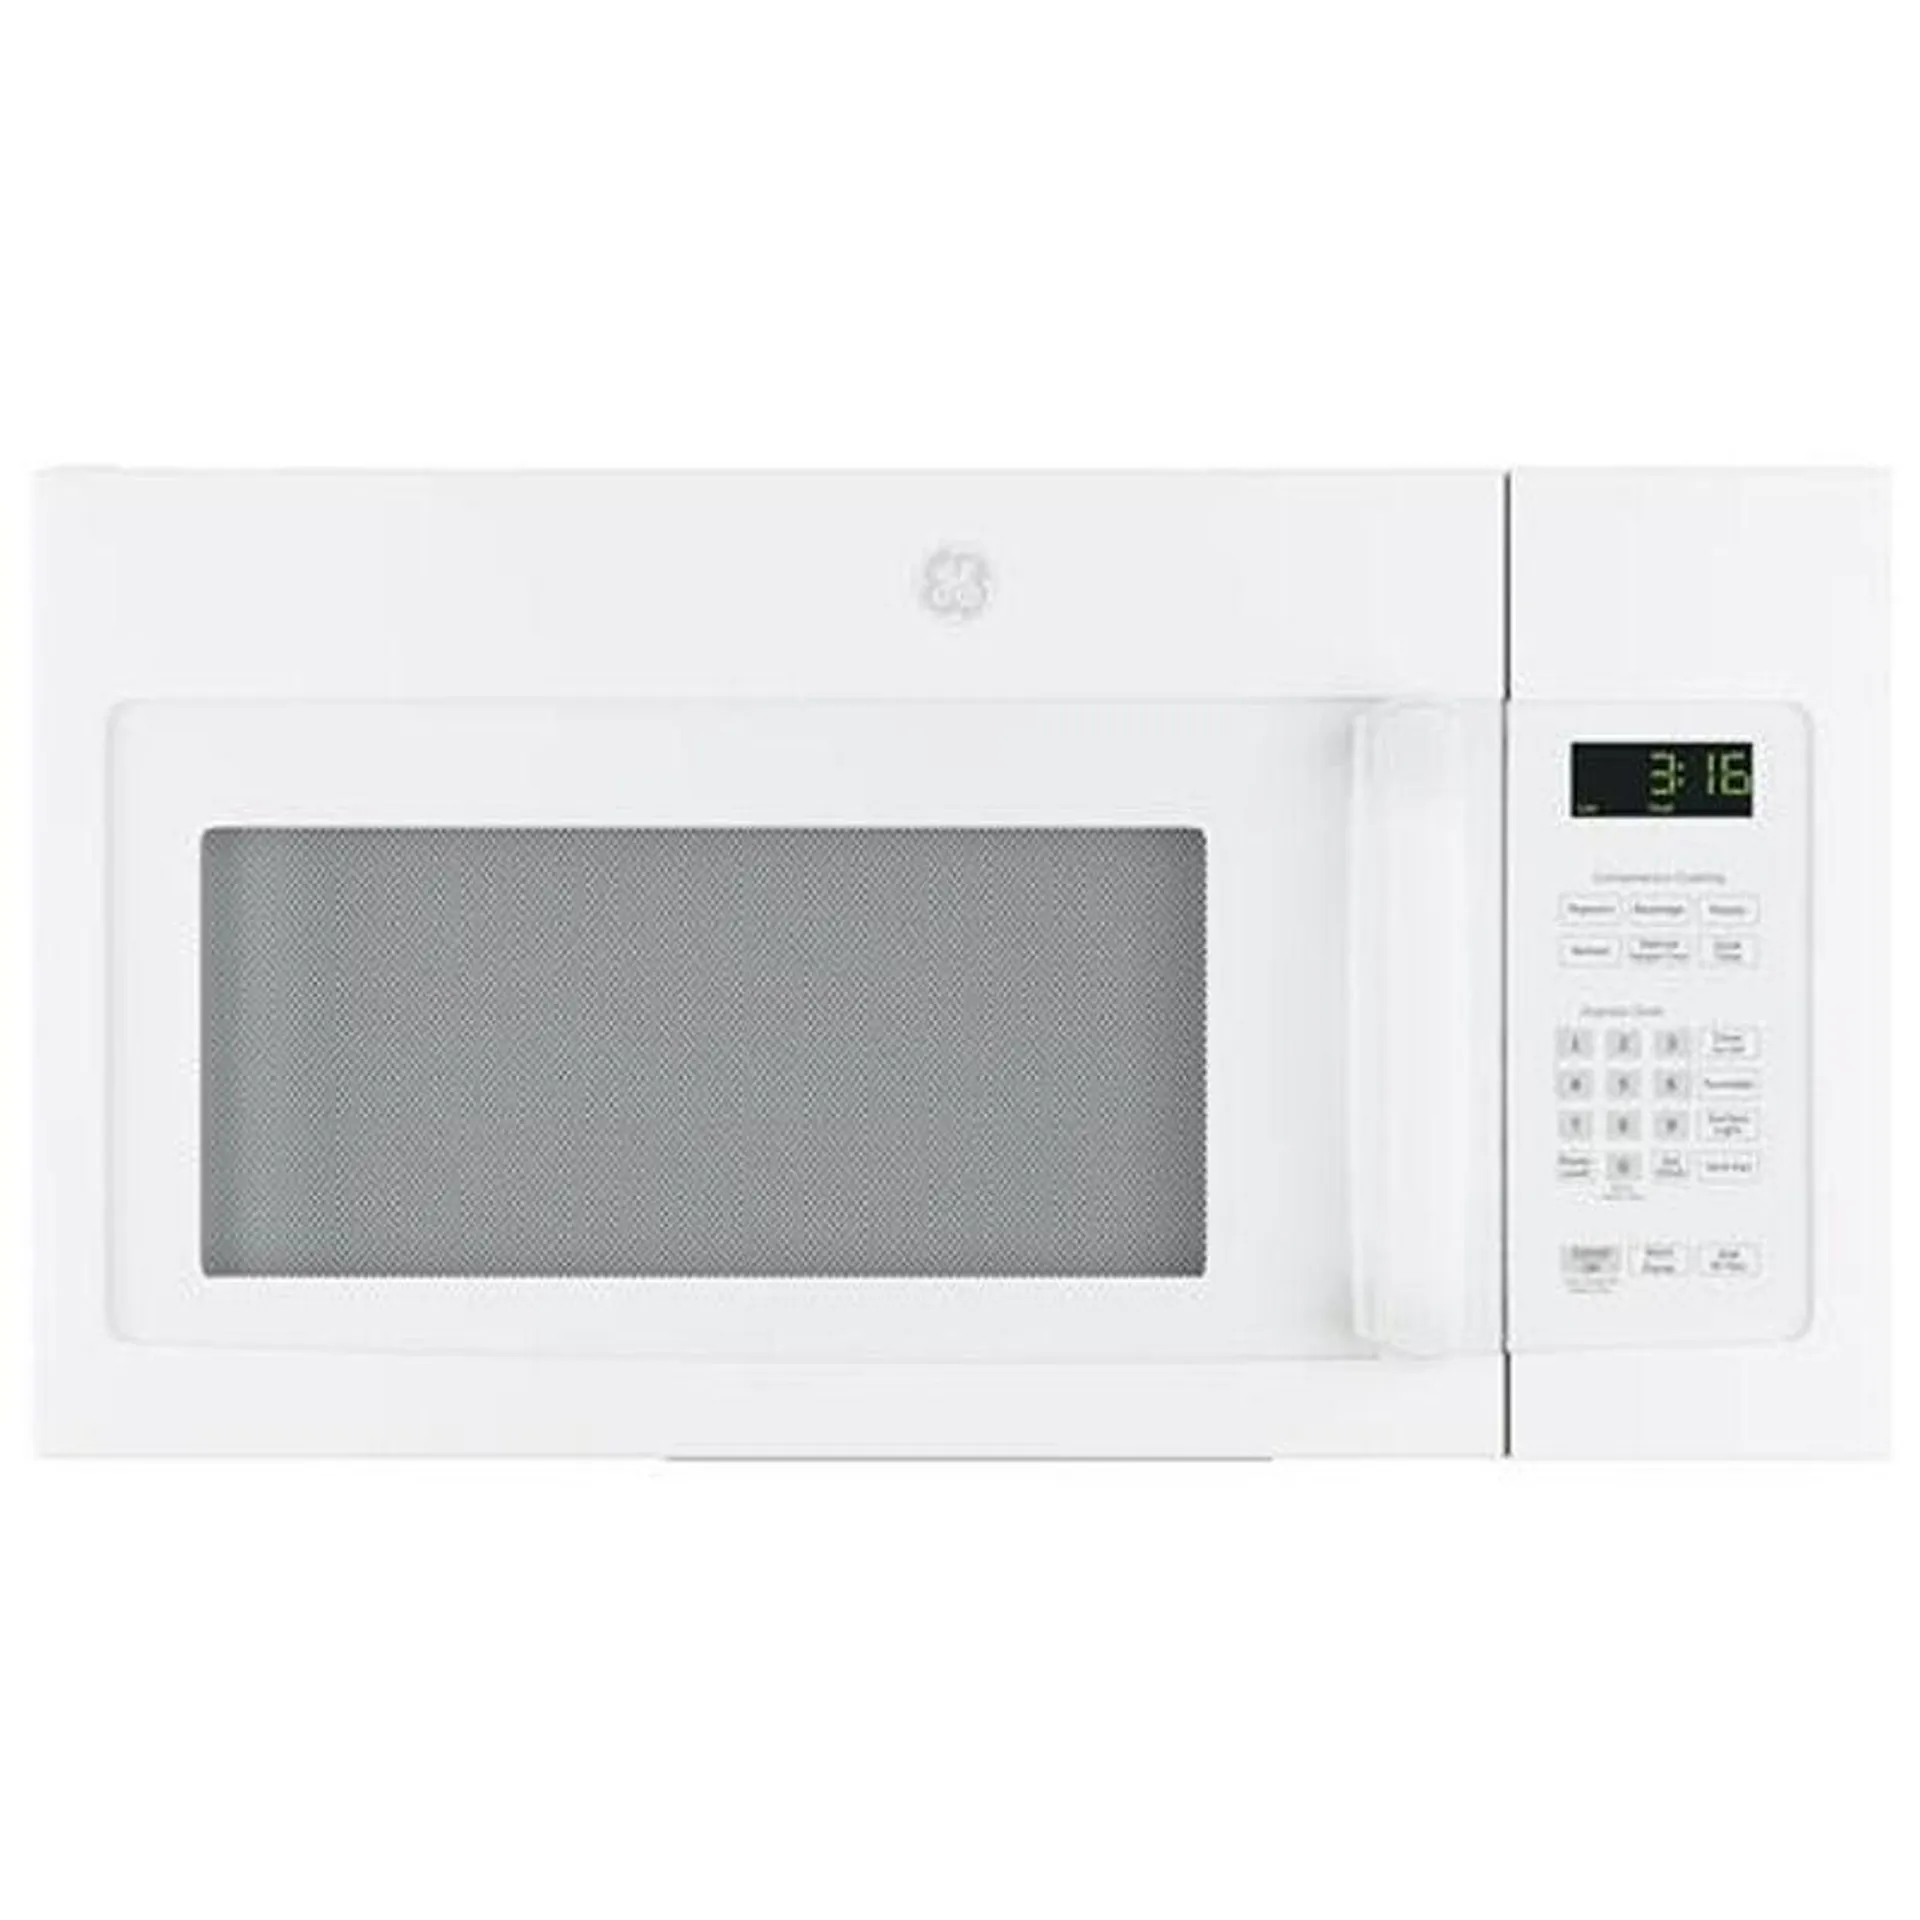 GE 30" 1.6 Cu. Ft. Over-the-Range Microwave with 10 Power Levels & 300 CFM - White